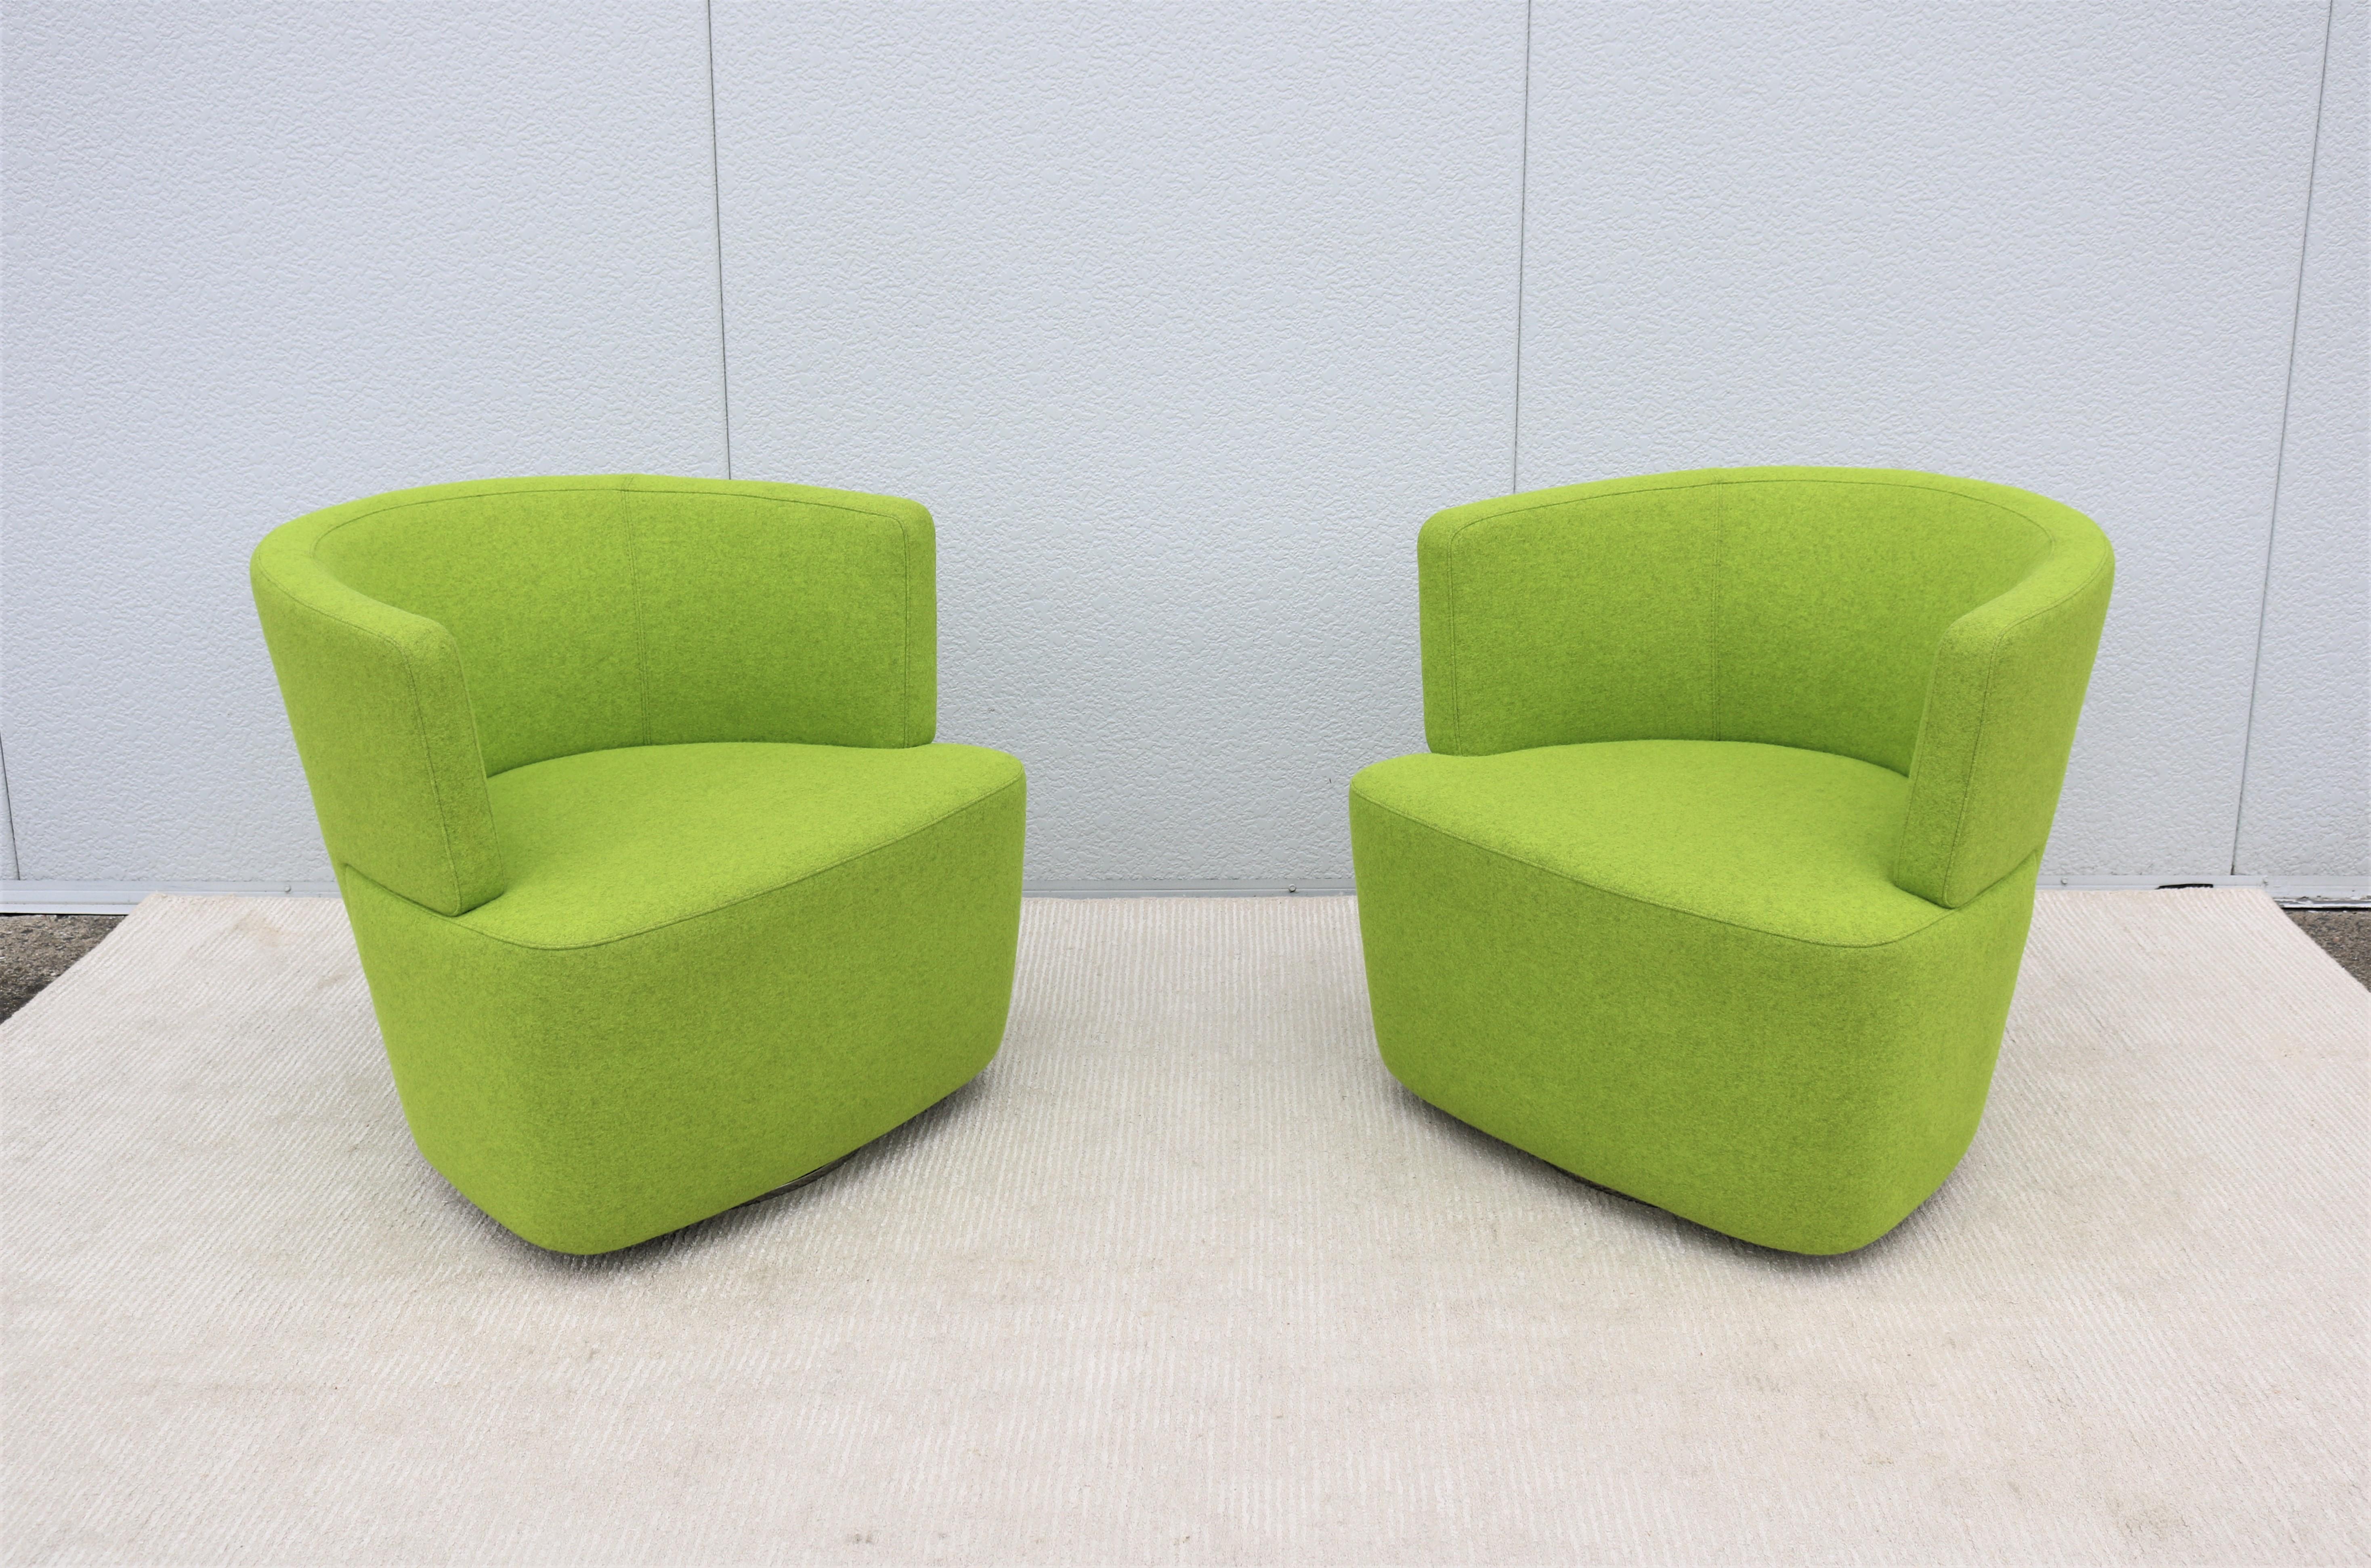 Fabulous pair of Joel green swivel lounge chairs by Walter Knoll.
The modern beauty and smart design of the Joel lounge chair is a new take on the classic club chair.
Refined and modern masterpiece that's comfortable and well designed,